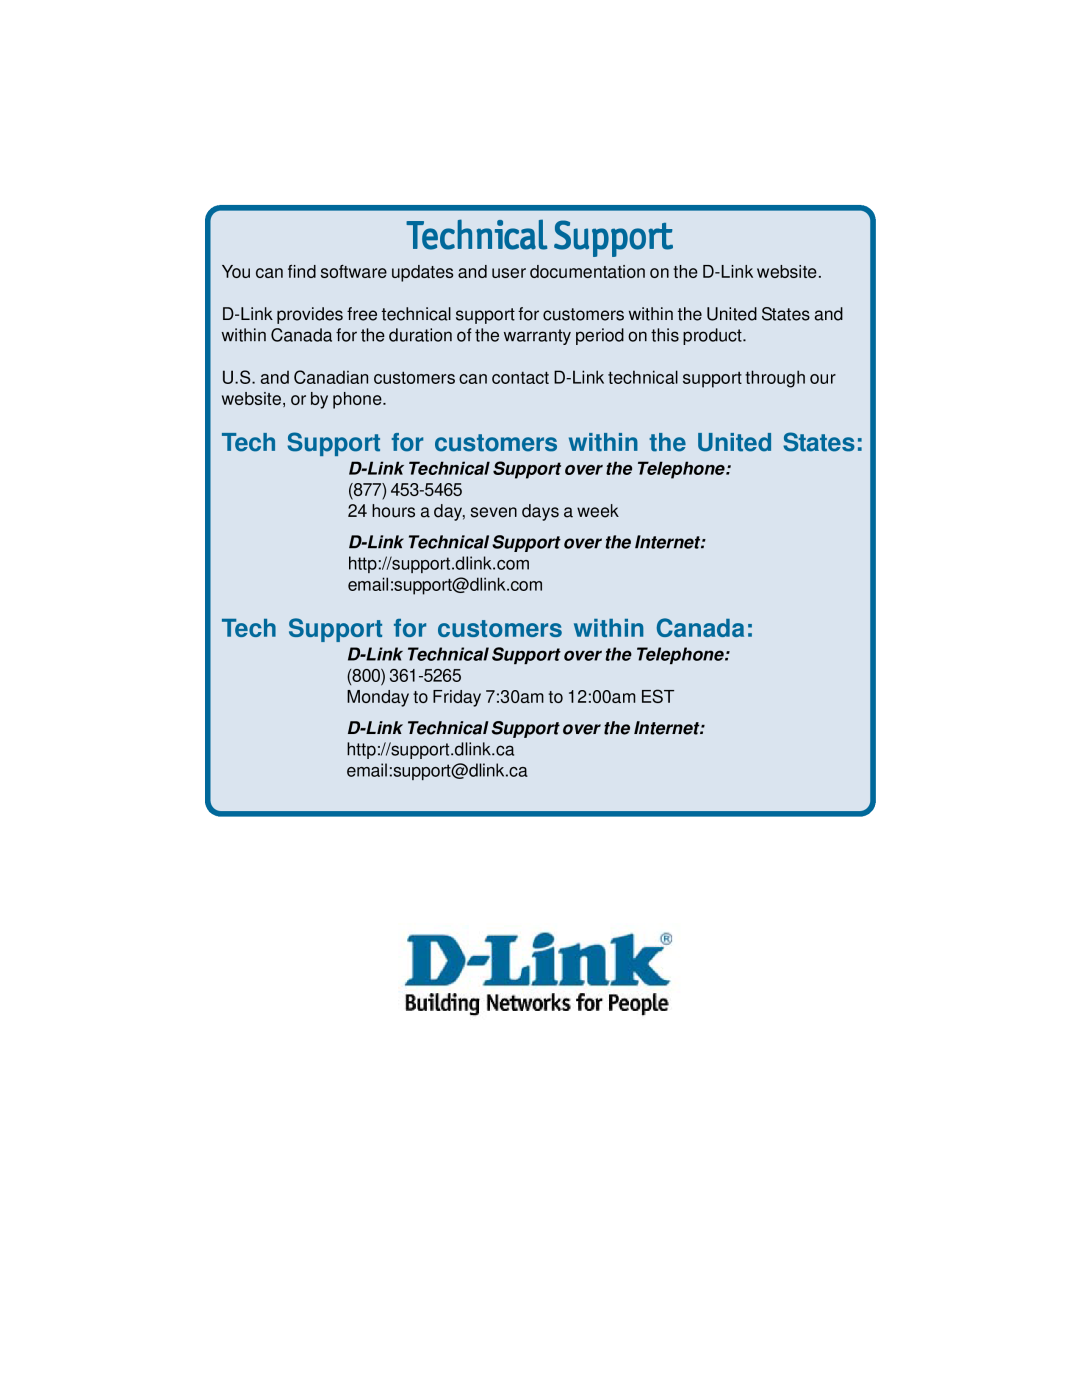 D-Link DVC-2000 warranty Technical Support, Tech Support for customers within the United States 